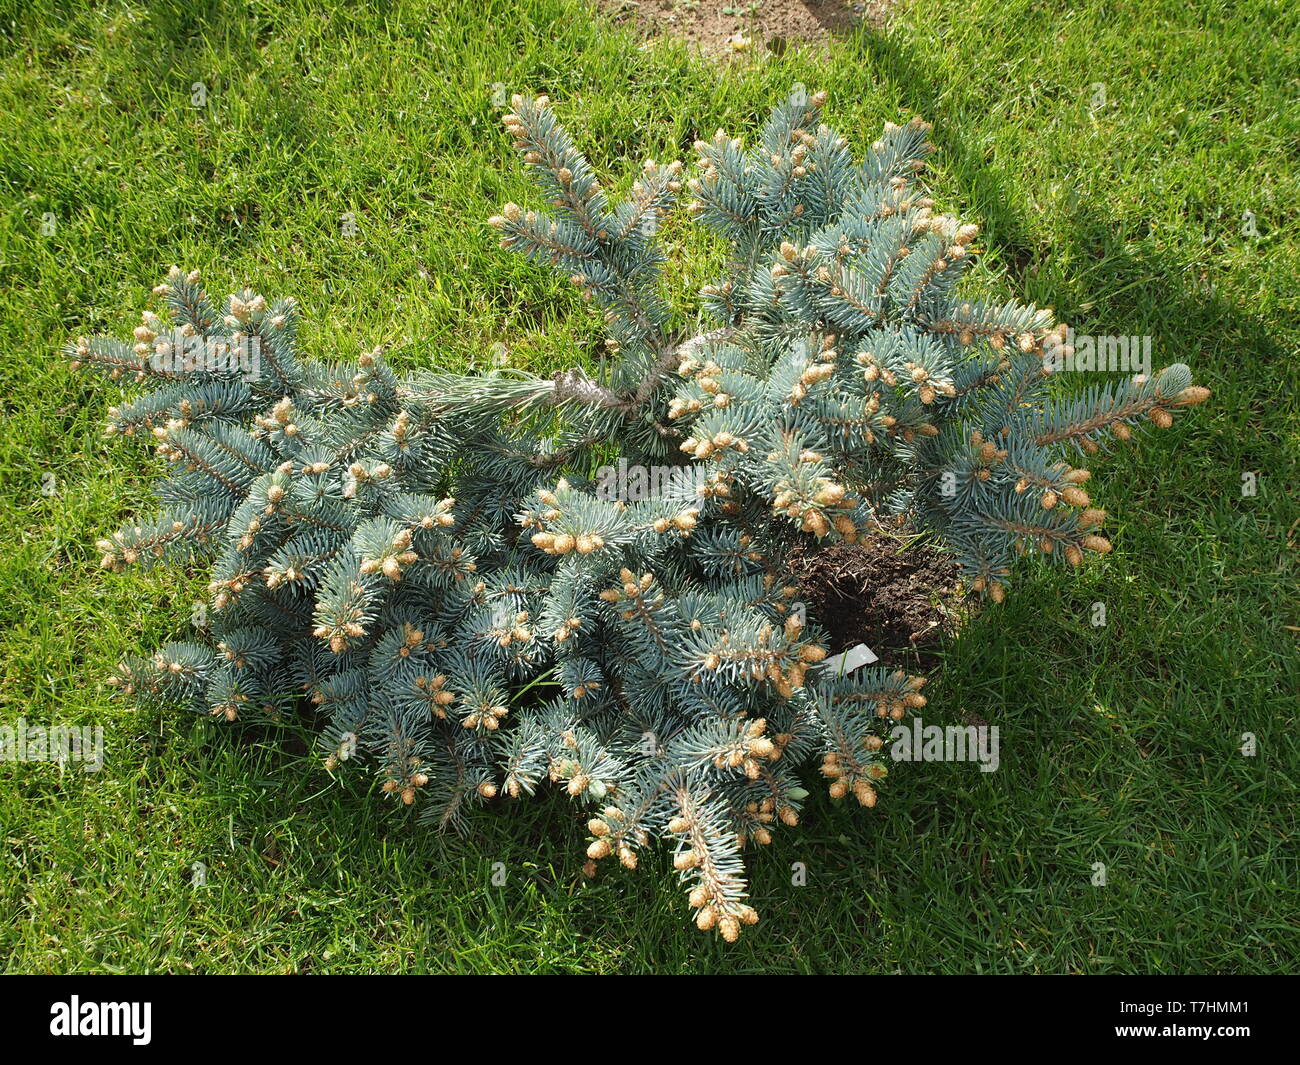 Picea pungens 'Globosa', or Colorado Spruce, pine tree or bush with glaucous blue needles Stock Photo